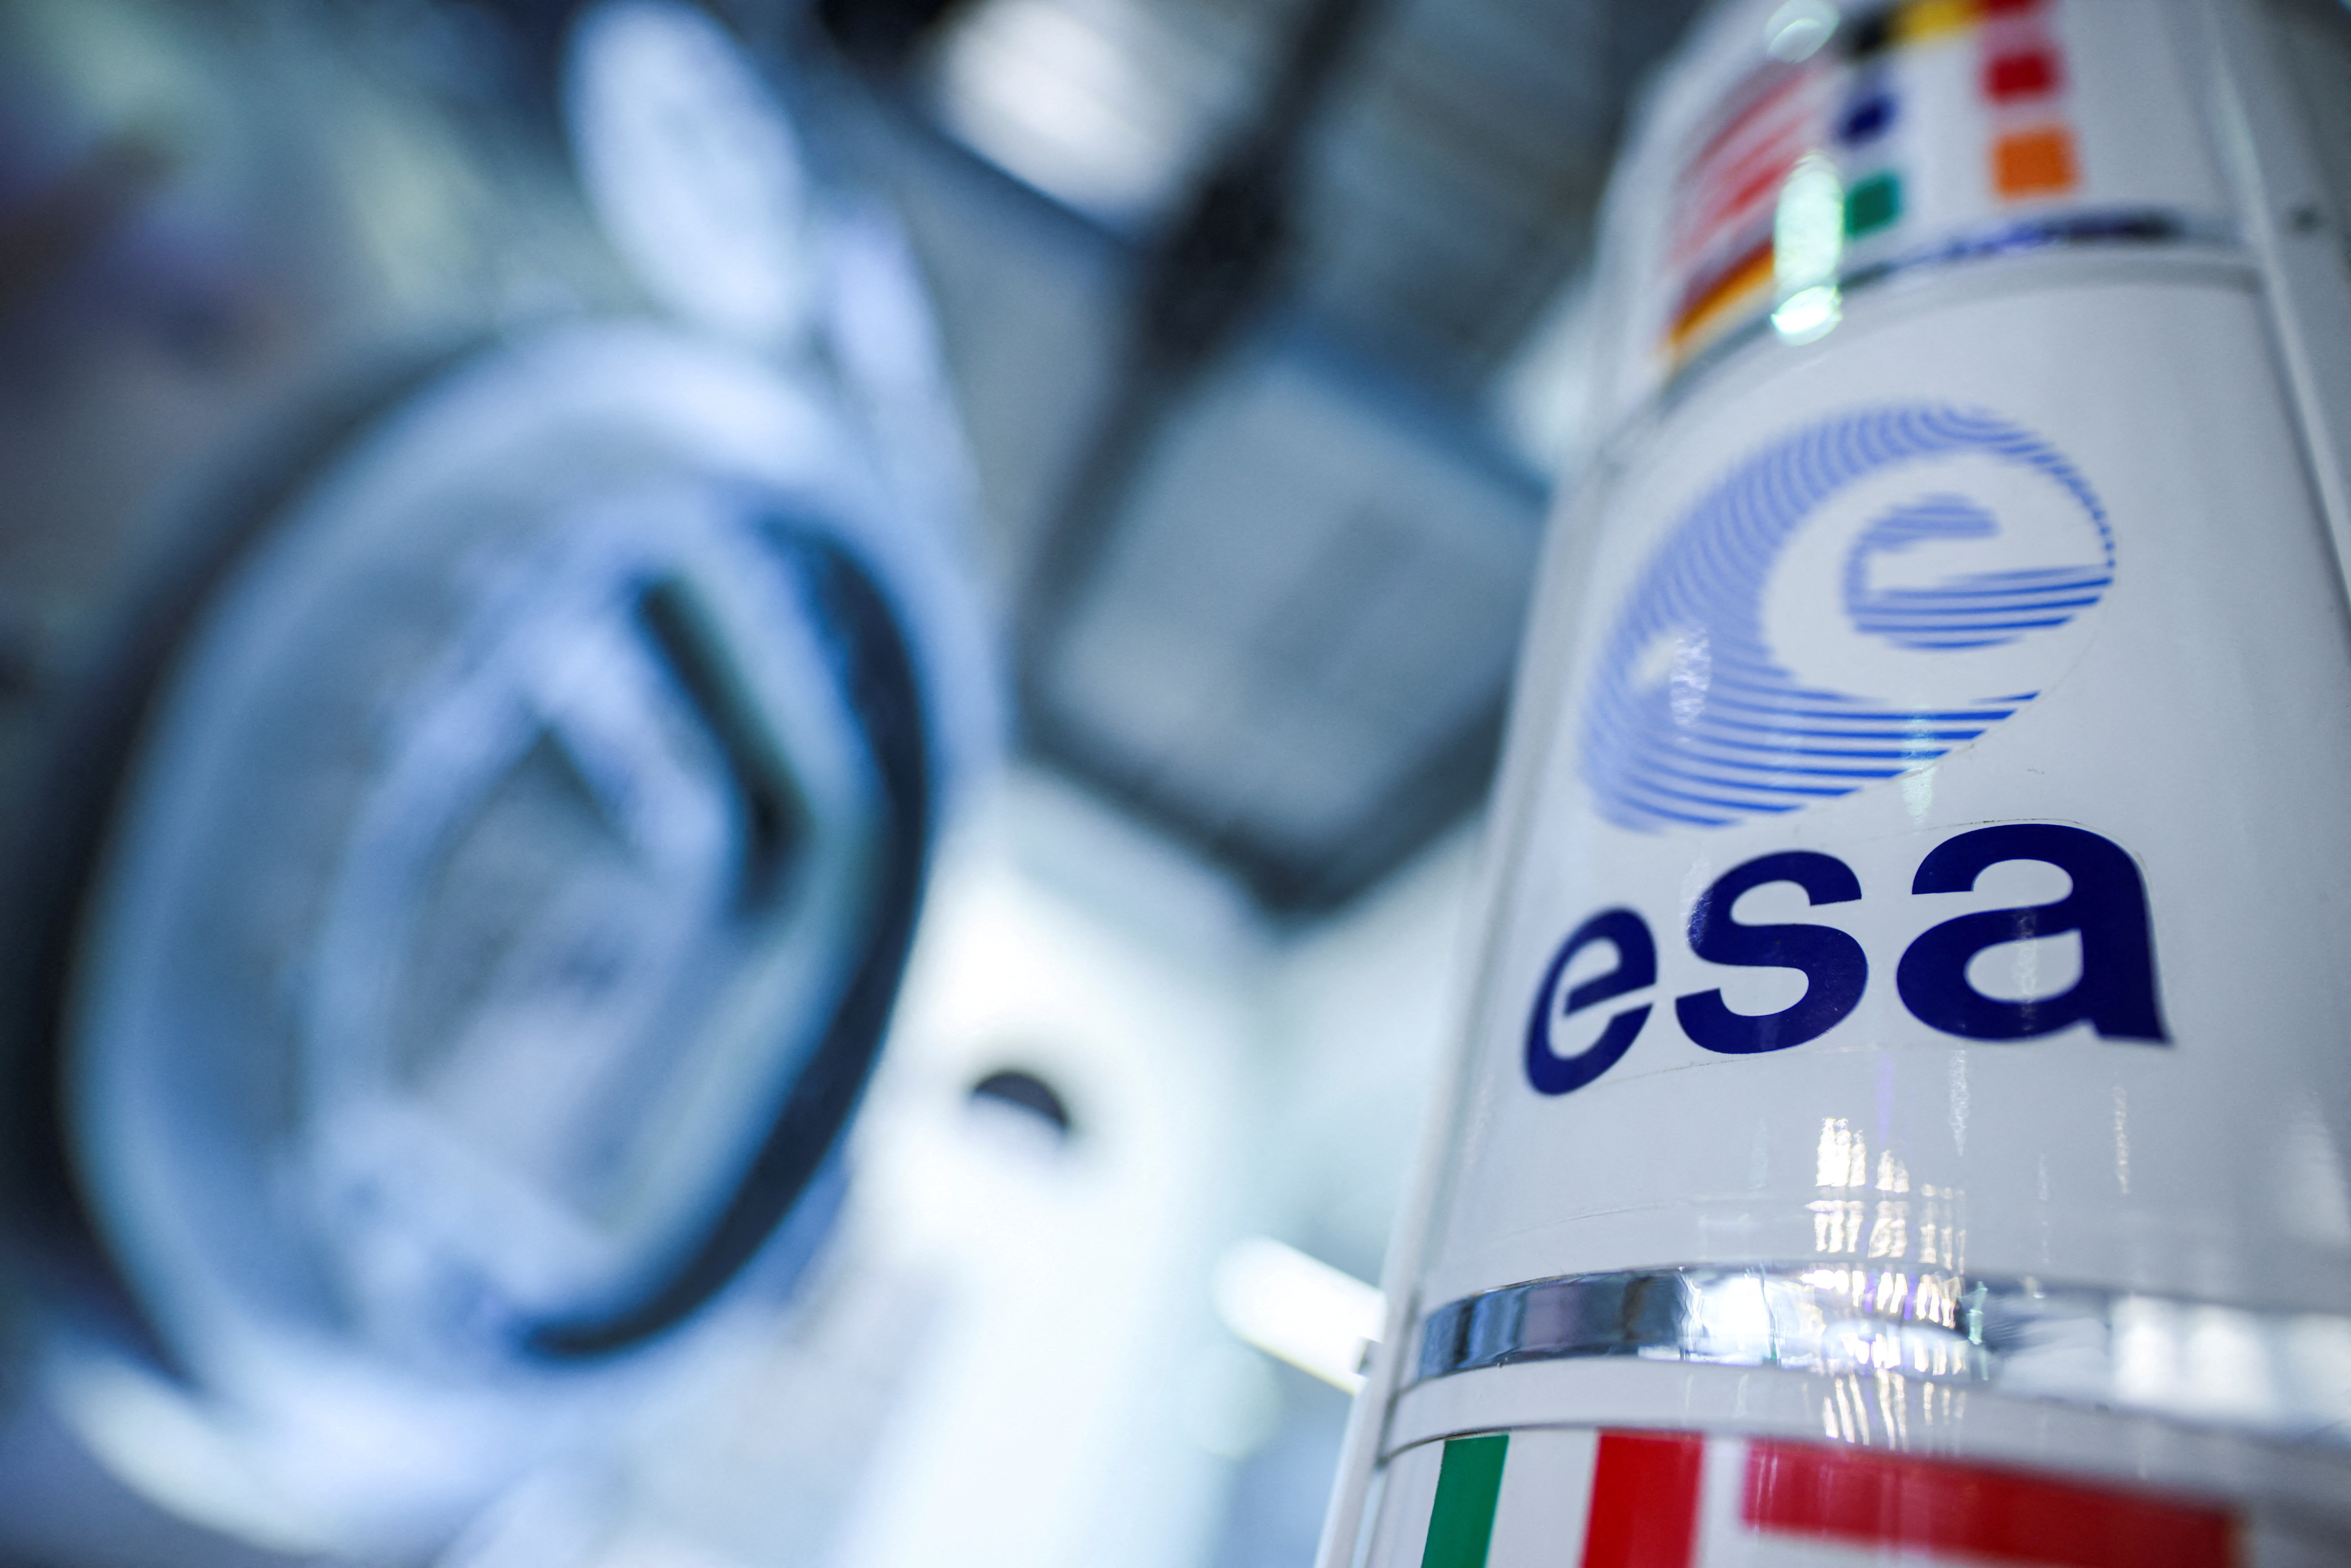 ESA's European Astronaut Centre (EAC) logo is pictured in Cologne, Germany, May 11, 2022.